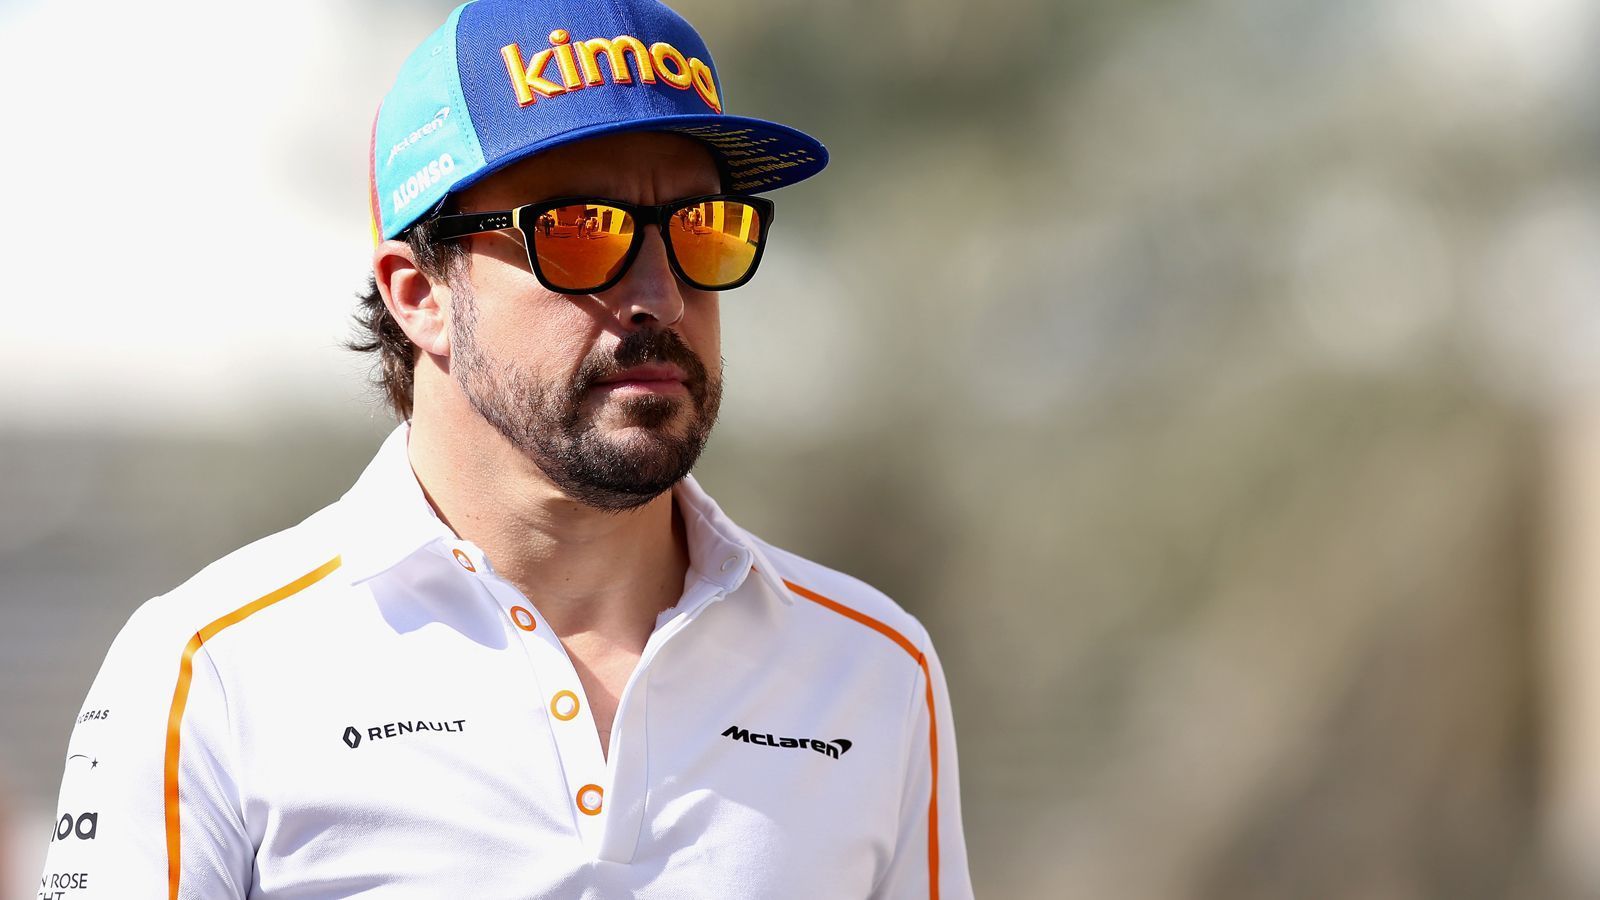 
                <strong>13. Fernando Alonso</strong><br>
                Punkte insgesamt: 10Aktuelle Punkte: 6Punkte 2014: 0Punkte 2015: 2Punkte 2016: 0Punkte 2017: 2Punkte 2018: 6Punkte 2019: /
              